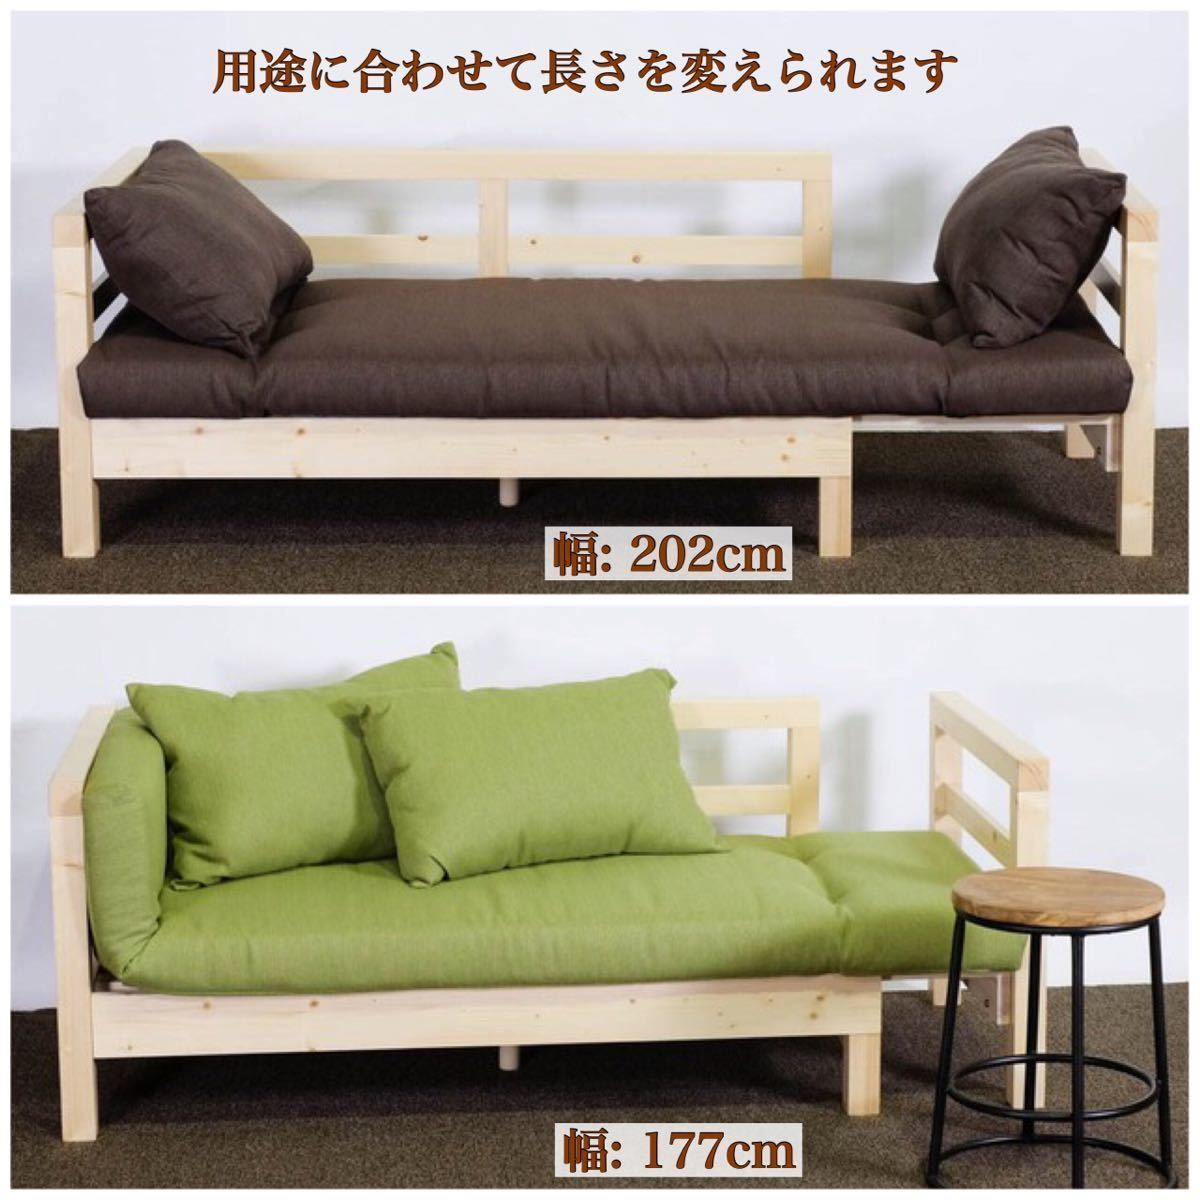  new goods Northern Europe pine sofa bed orange . length sofa bed Country semi single rack base bad duckboard mattress Northern Europe 2 person for holiday house 